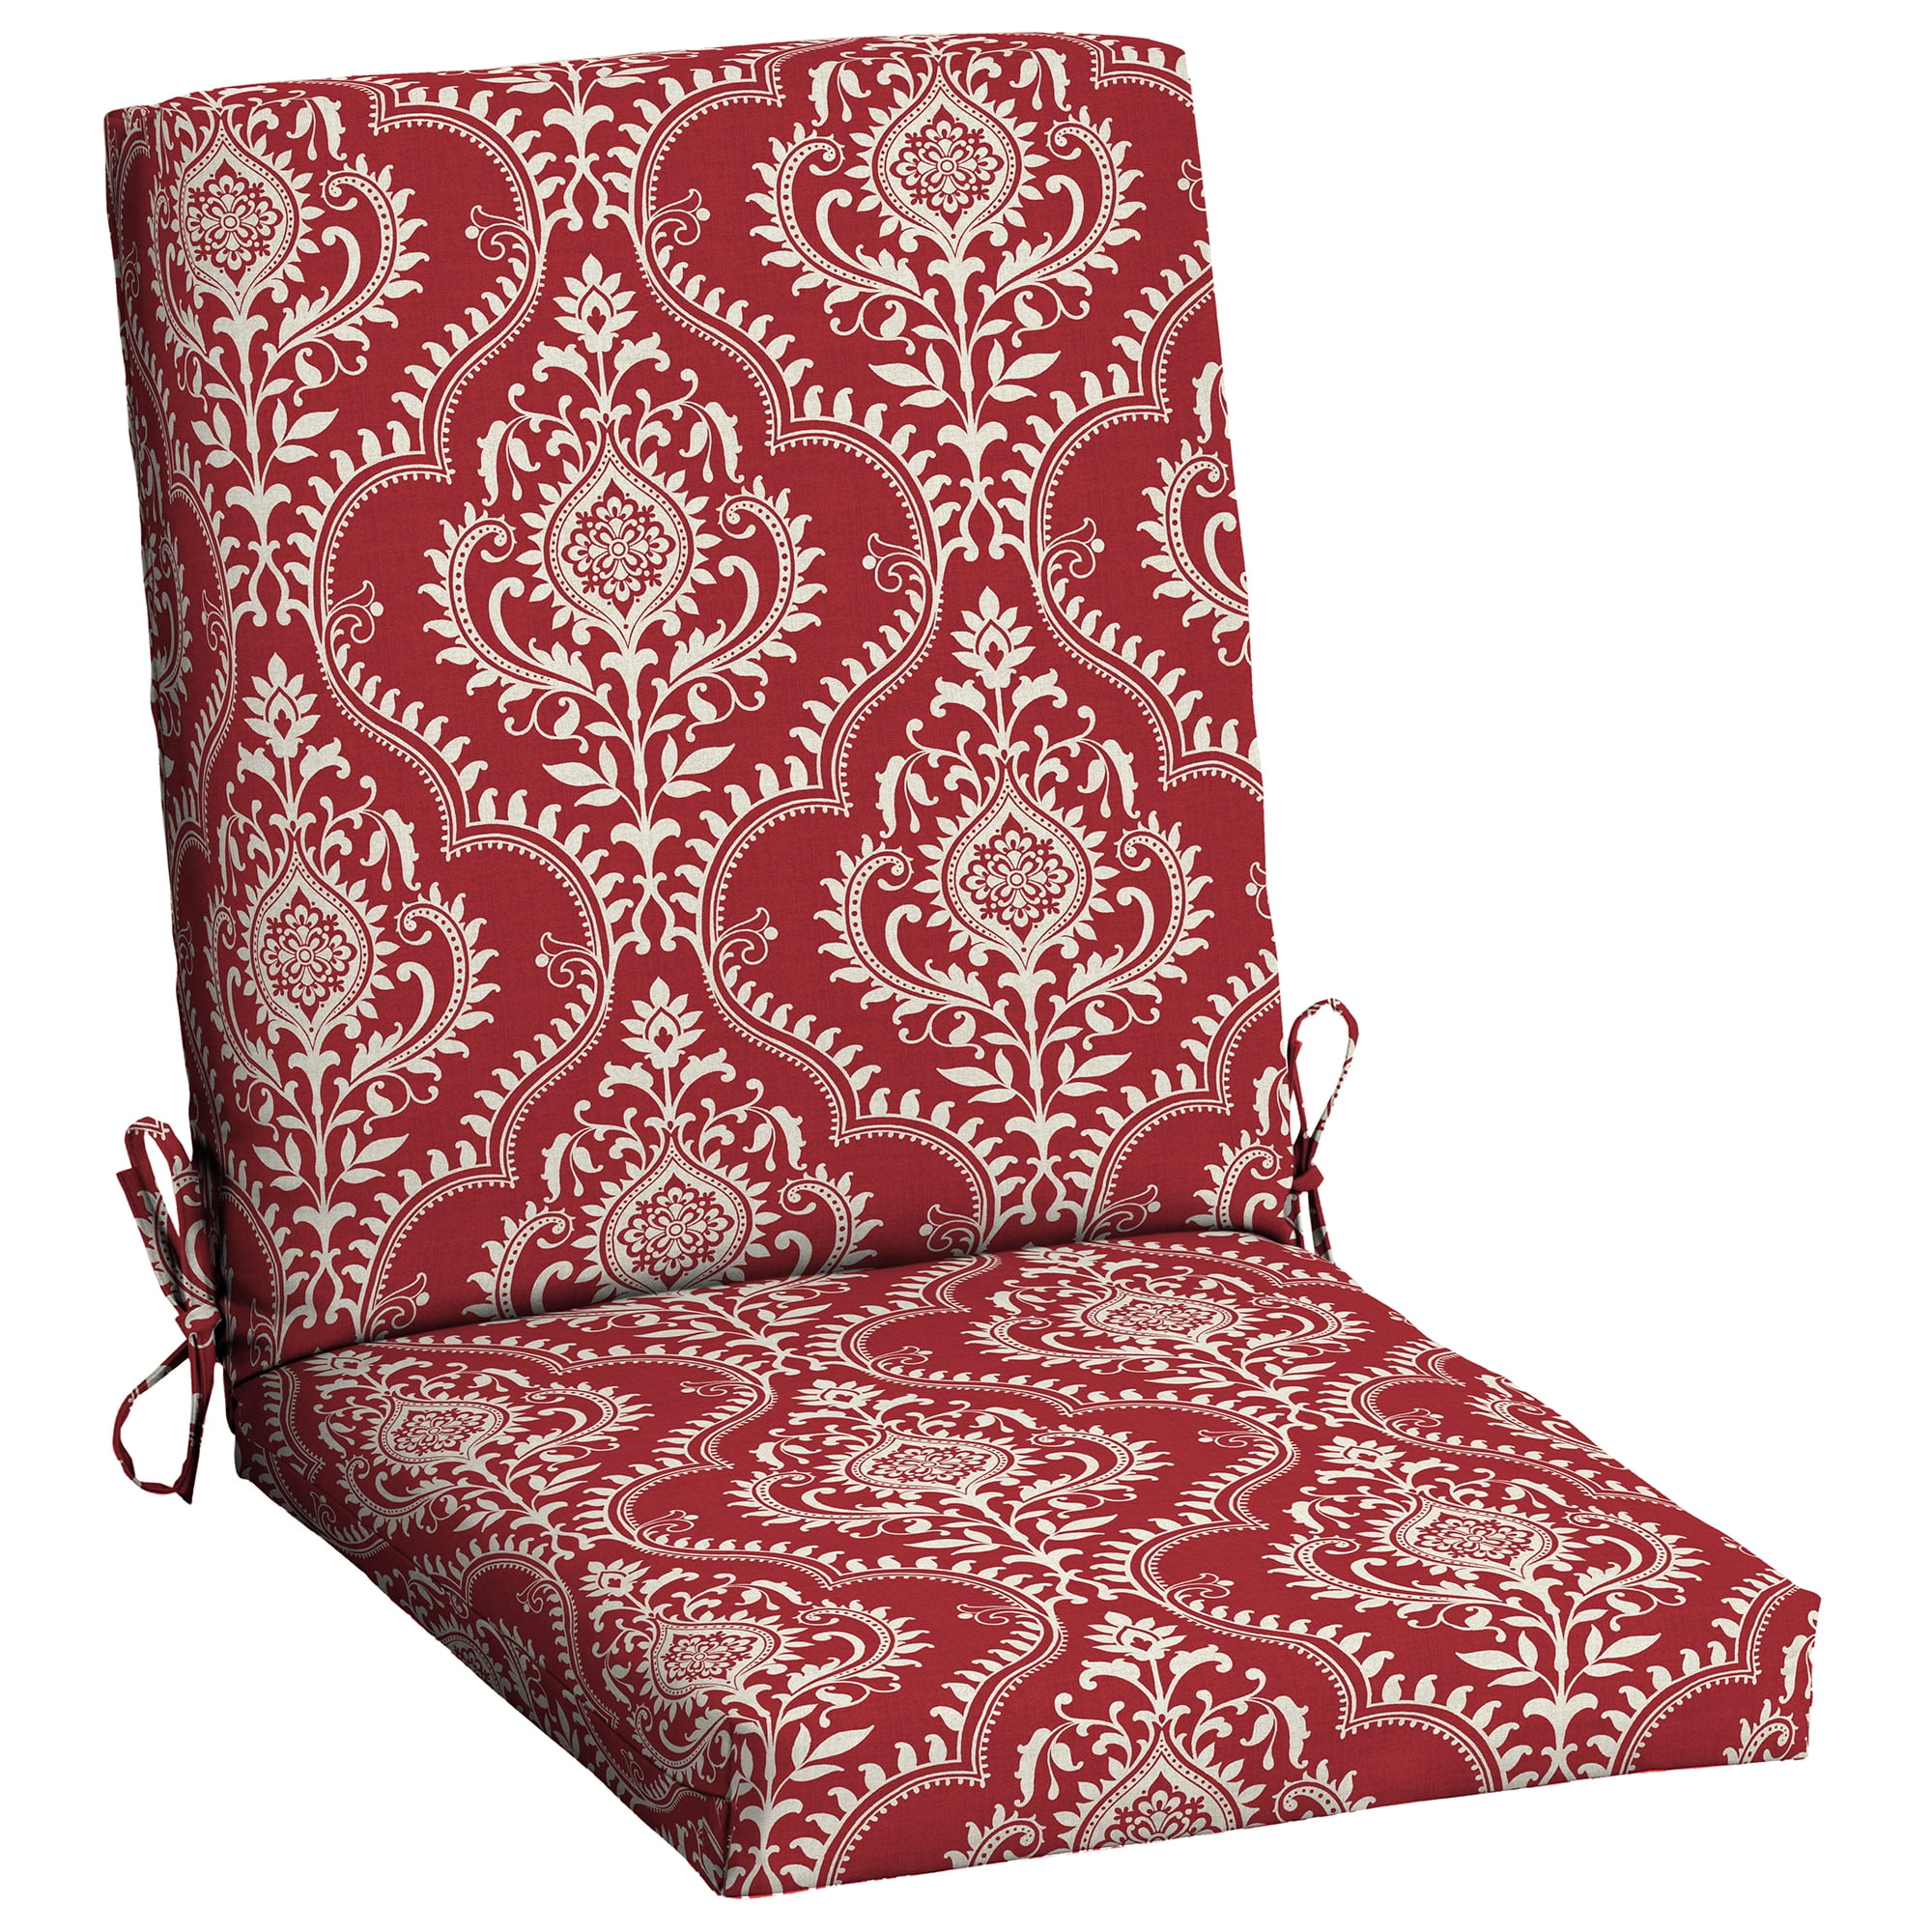 Outdoor Wicker Chair Cushions